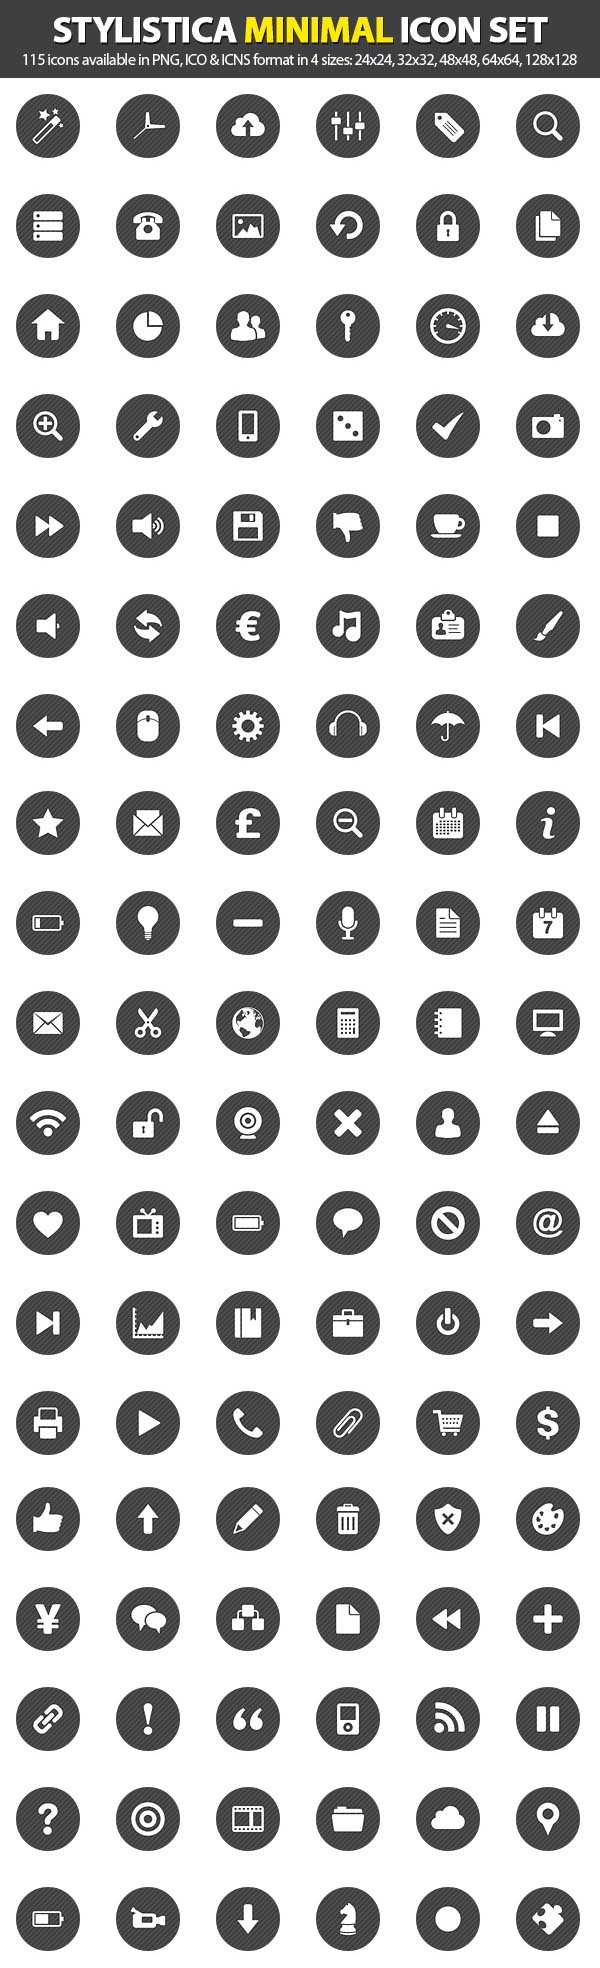 Free Vector Icons Pack 14